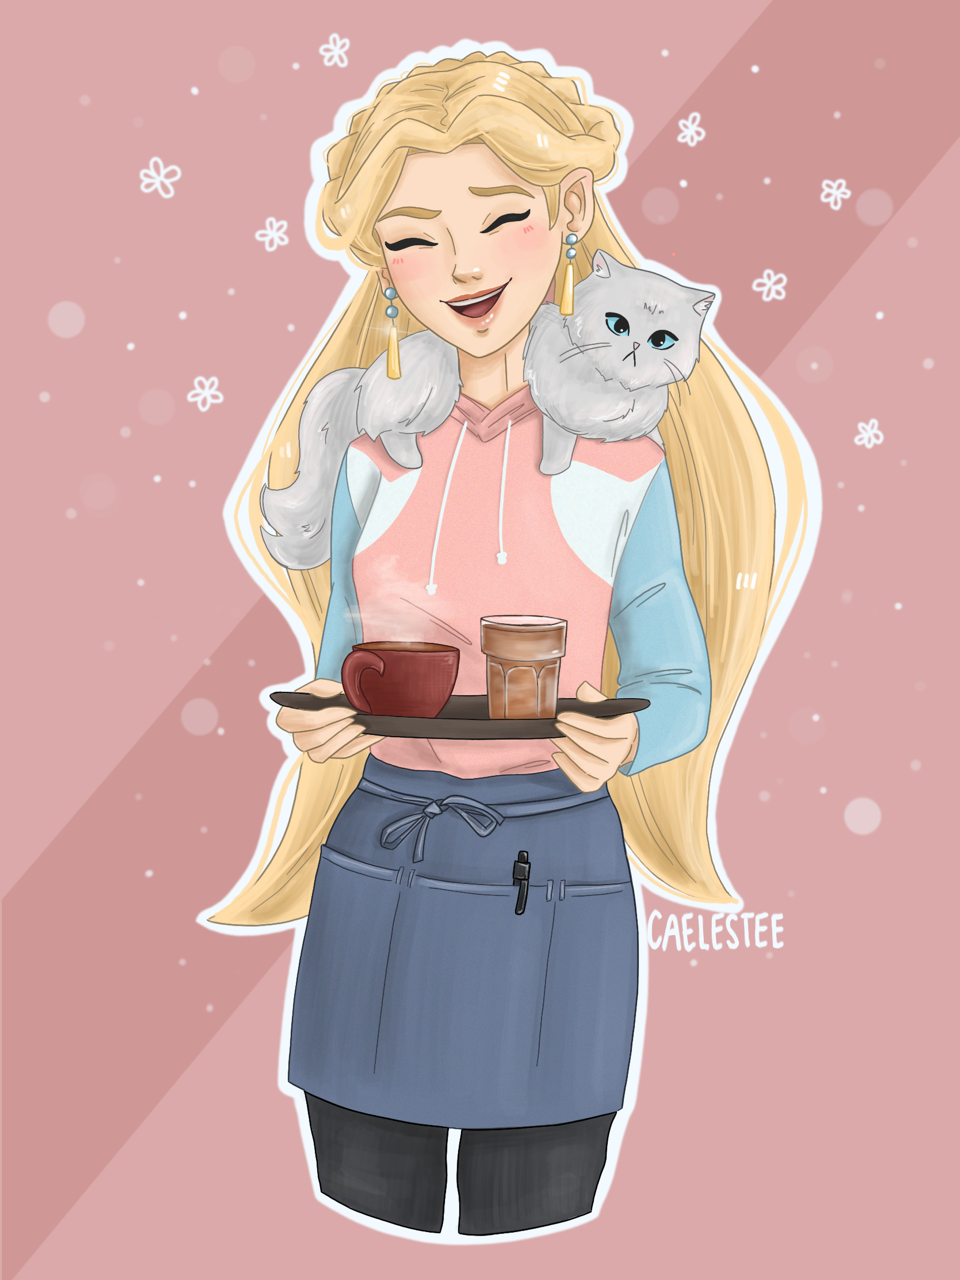 Romelle the Altean Girl with her kitty cat and her tray of cups for tea from Voltron Legendary Defender. Voltron fanart, Voltron, Voltron legendary defender